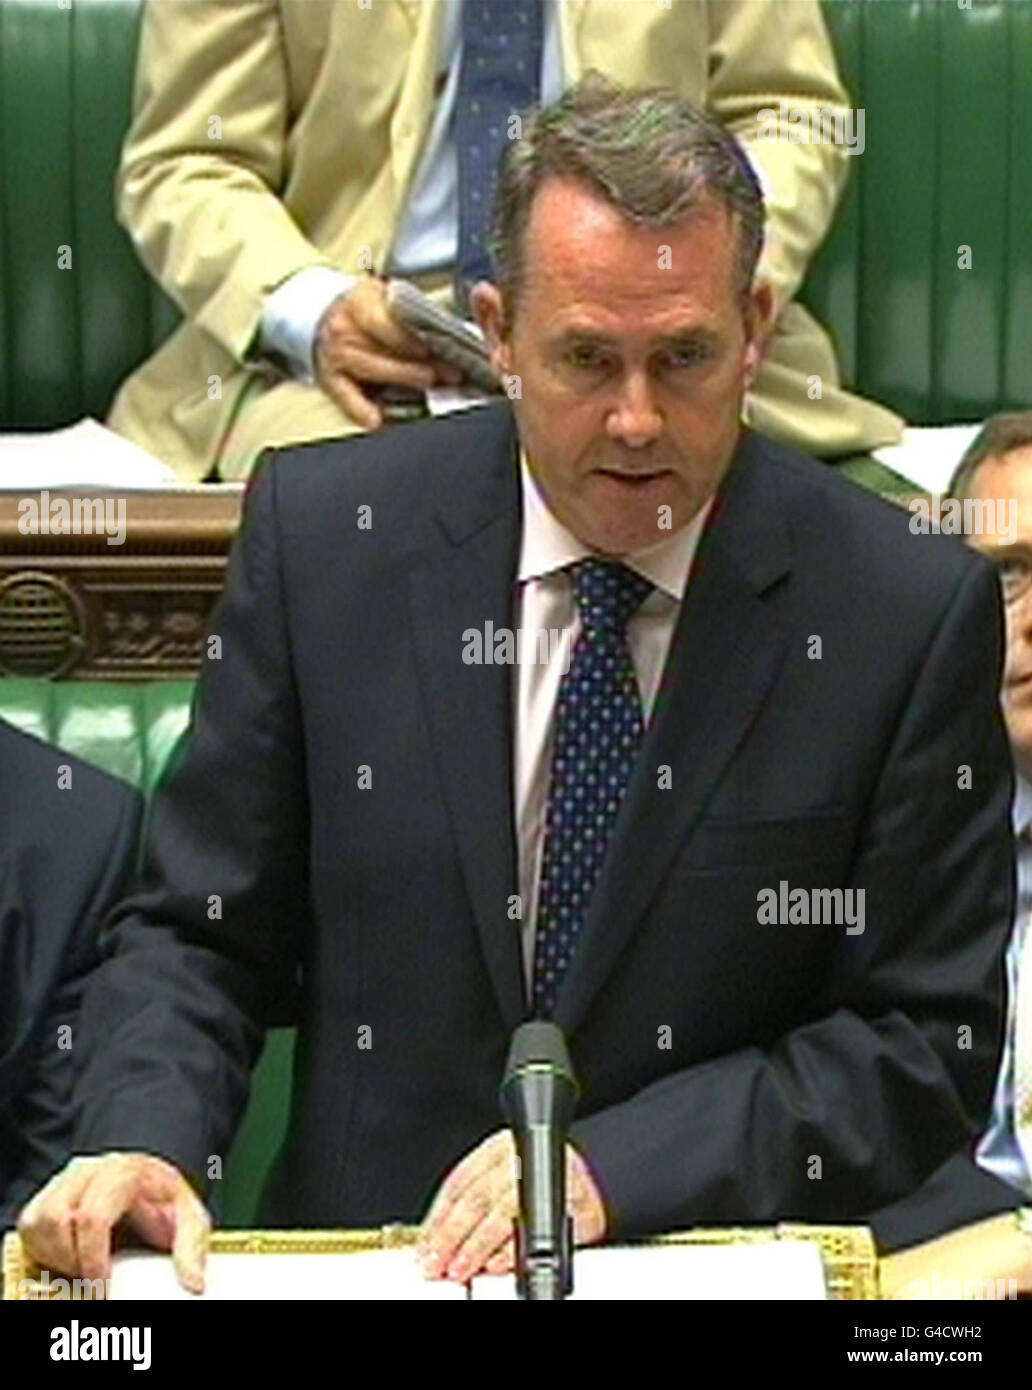 Defence secretary Liam Fox speaks in the House of Commons, London, after he pledged an end to waste and lack of control over major projects at the Ministry of Defence (MoD) as he backed plans for a radical overhaul in organisation and management of the Whitehall department. Stock Photo